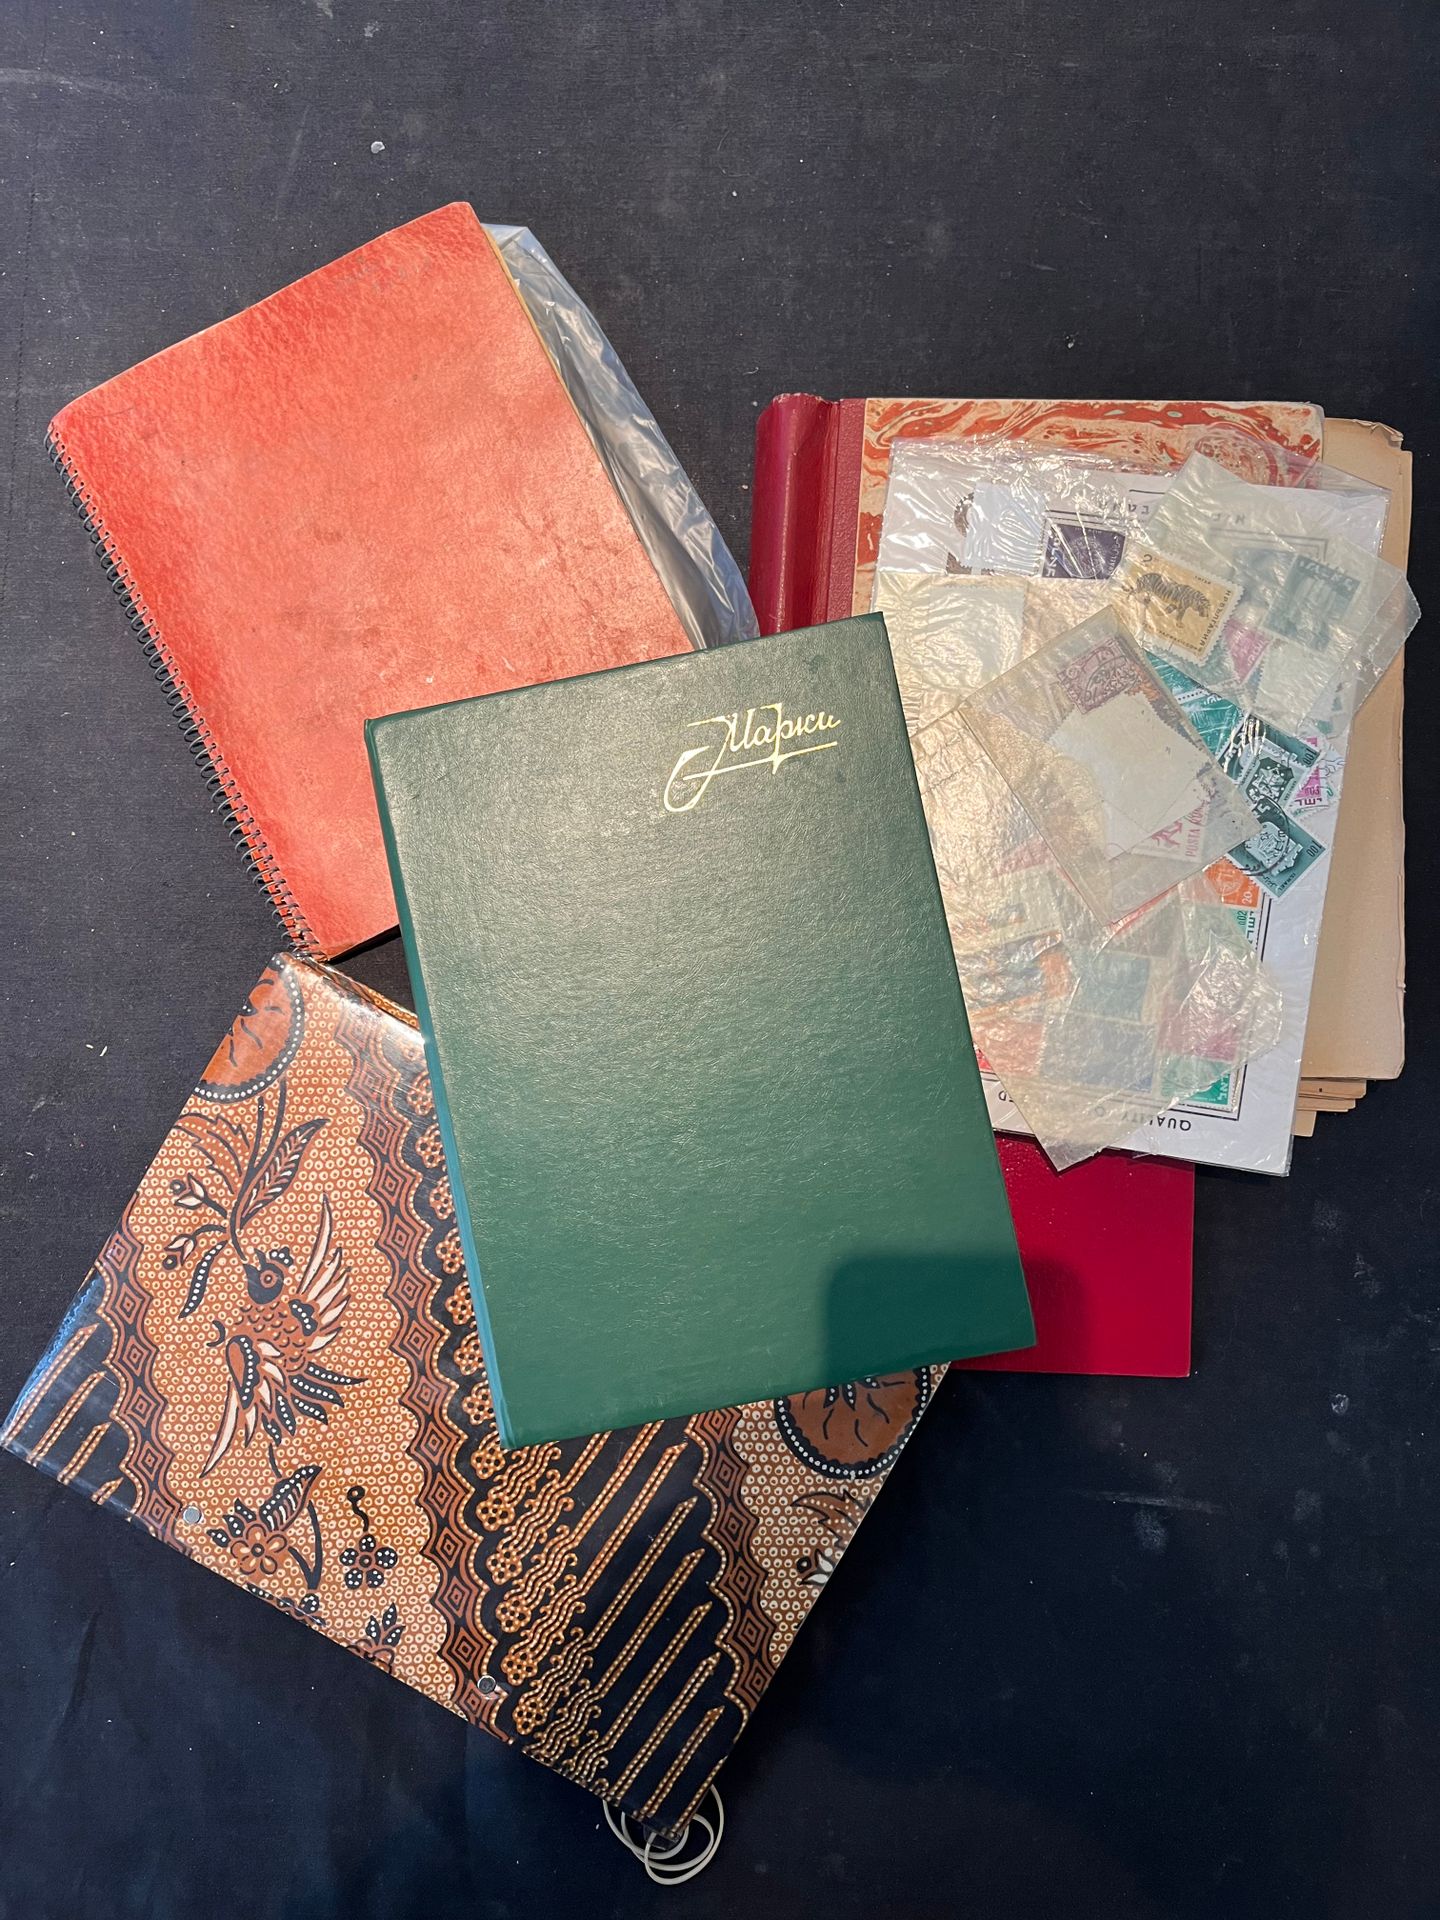 Null [MISCELLANEOUS COUNTRIES]
5 stamp albums and 2 bulk bags.